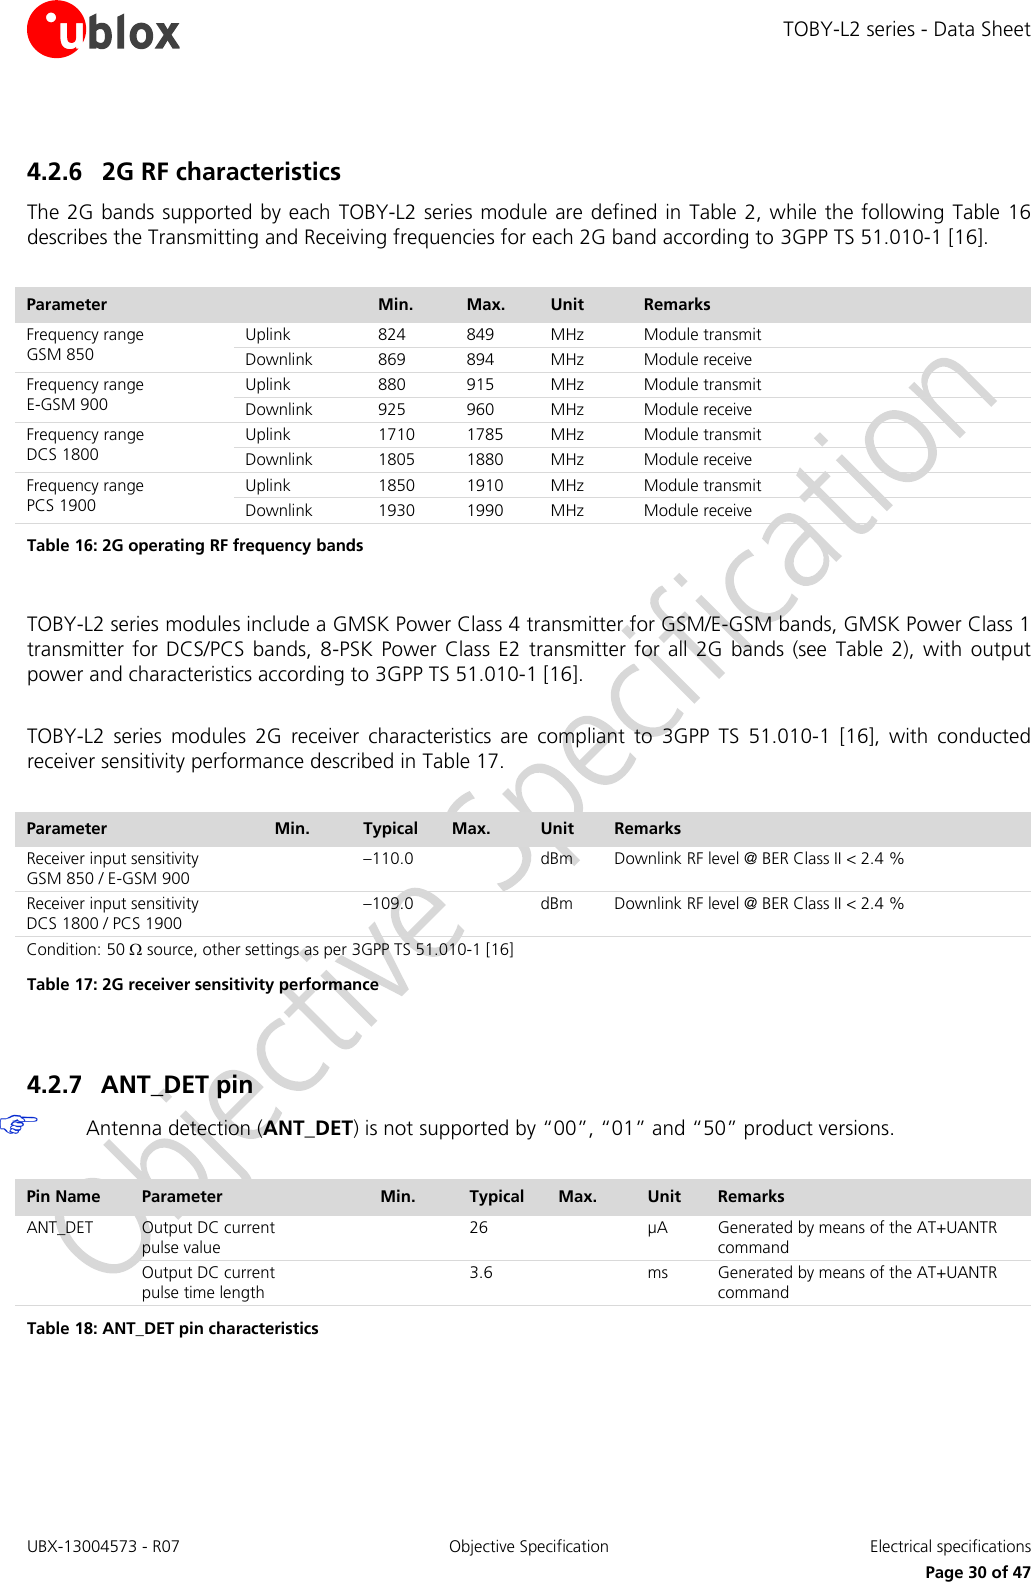 TOBY-L2 series - Data Sheet UBX-13004573 - R07  Objective Specification  Electrical specifications   Page 30 of 47 4.2.6 2G RF characteristics The 2G bands supported by each  TOBY-L2 series module are defined in Table 2, while the following Table 16 describes the Transmitting and Receiving frequencies for each 2G band according to 3GPP TS 51.010-1 [16].  Parameter   Min. Max. Unit Remarks Frequency range GSM 850 Uplink 824 849 MHz Module transmit Downlink 869 894 MHz Module receive Frequency range E-GSM 900 Uplink 880 915 MHz Module transmit Downlink 925 960 MHz Module receive Frequency range DCS 1800 Uplink 1710 1785 MHz Module transmit Downlink 1805 1880 MHz Module receive Frequency range PCS 1900 Uplink 1850 1910 MHz Module transmit Downlink 1930 1990 MHz Module receive Table 16: 2G operating RF frequency bands  TOBY-L2 series modules include a GMSK Power Class 4 transmitter for GSM/E-GSM bands, GMSK Power Class 1 transmitter  for  DCS/PCS  bands,  8-PSK  Power  Class E2  transmitter  for  all  2G  bands (see  Table  2),  with  output power and characteristics according to 3GPP TS 51.010-1 [16].  TOBY-L2  series  modules  2G  receiver  characteristics  are  compliant  to  3GPP  TS  51.010-1  [16],  with  conducted receiver sensitivity performance described in Table 17.  Parameter Min. Typical Max. Unit Remarks Receiver input sensitivity GSM 850 / E-GSM 900  –110.0  dBm Downlink RF level @ BER Class II &lt; 2.4 % Receiver input sensitivity DCS 1800 / PCS 1900  –109.0  dBm Downlink RF level @ BER Class II &lt; 2.4 % Condition: 50  source, other settings as per 3GPP TS 51.010-1 [16] Table 17: 2G receiver sensitivity performance  4.2.7 ANT_DET pin  Antenna detection (ANT_DET) is not supported by “00”, “01” and “50” product versions.  Pin Name Parameter  Min.  Typical Max. Unit Remarks ANT_DET Output DC current  pulse value   26  µA Generated by means of the AT+UANTR command Output DC current  pulse time length   3.6  ms Generated by means of the AT+UANTR command Table 18: ANT_DET pin characteristics  